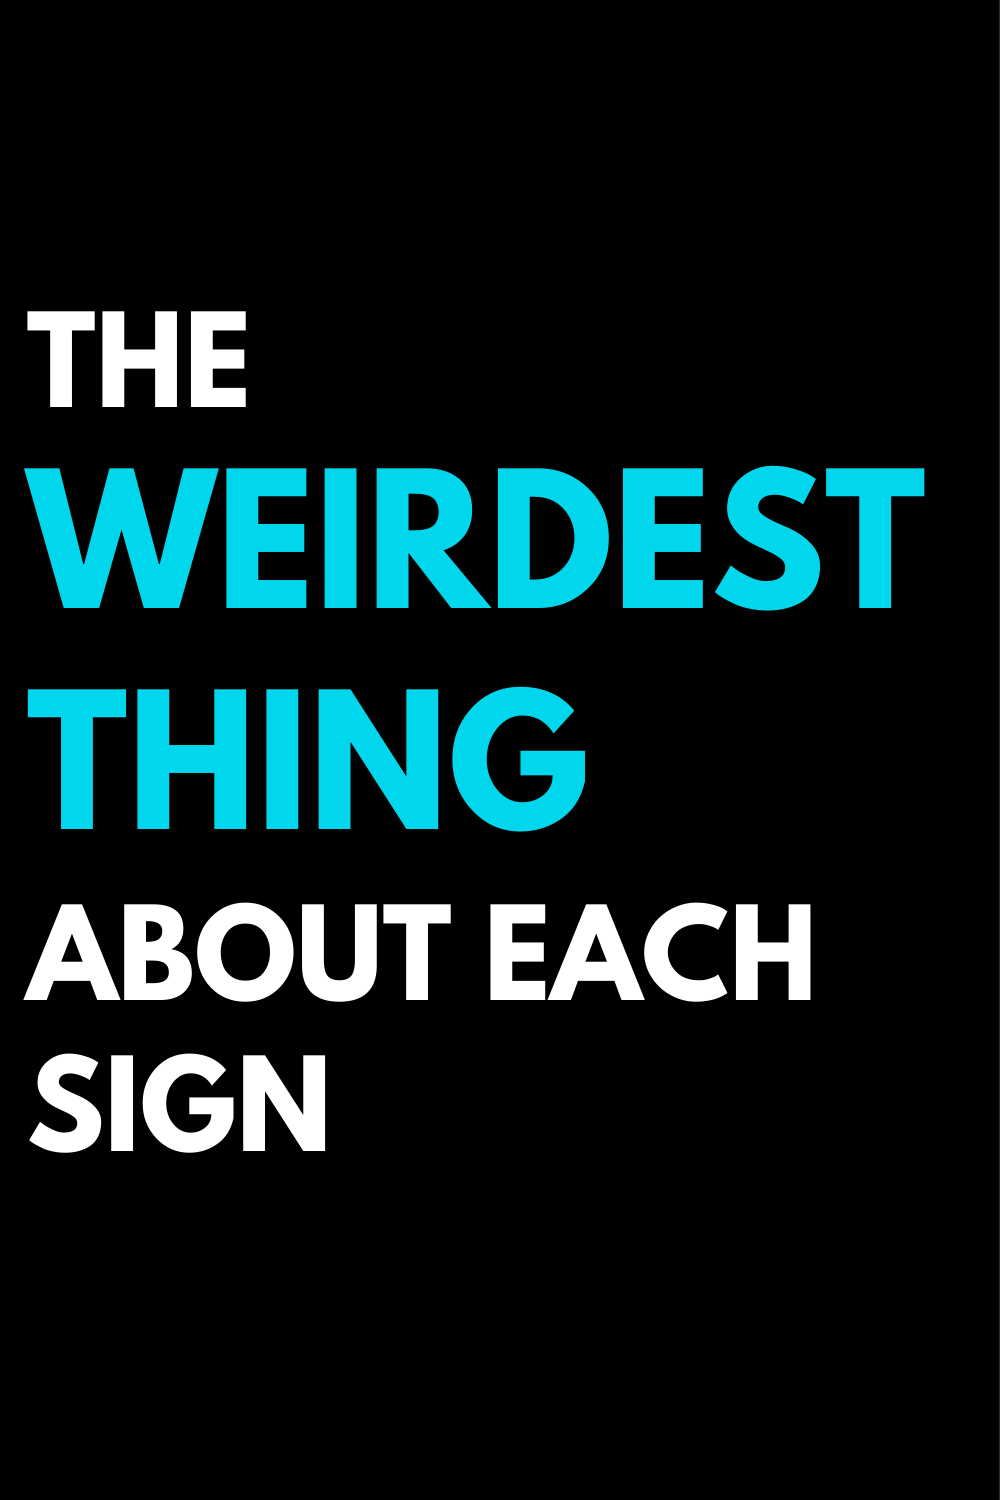 The weirdest thing about each sign